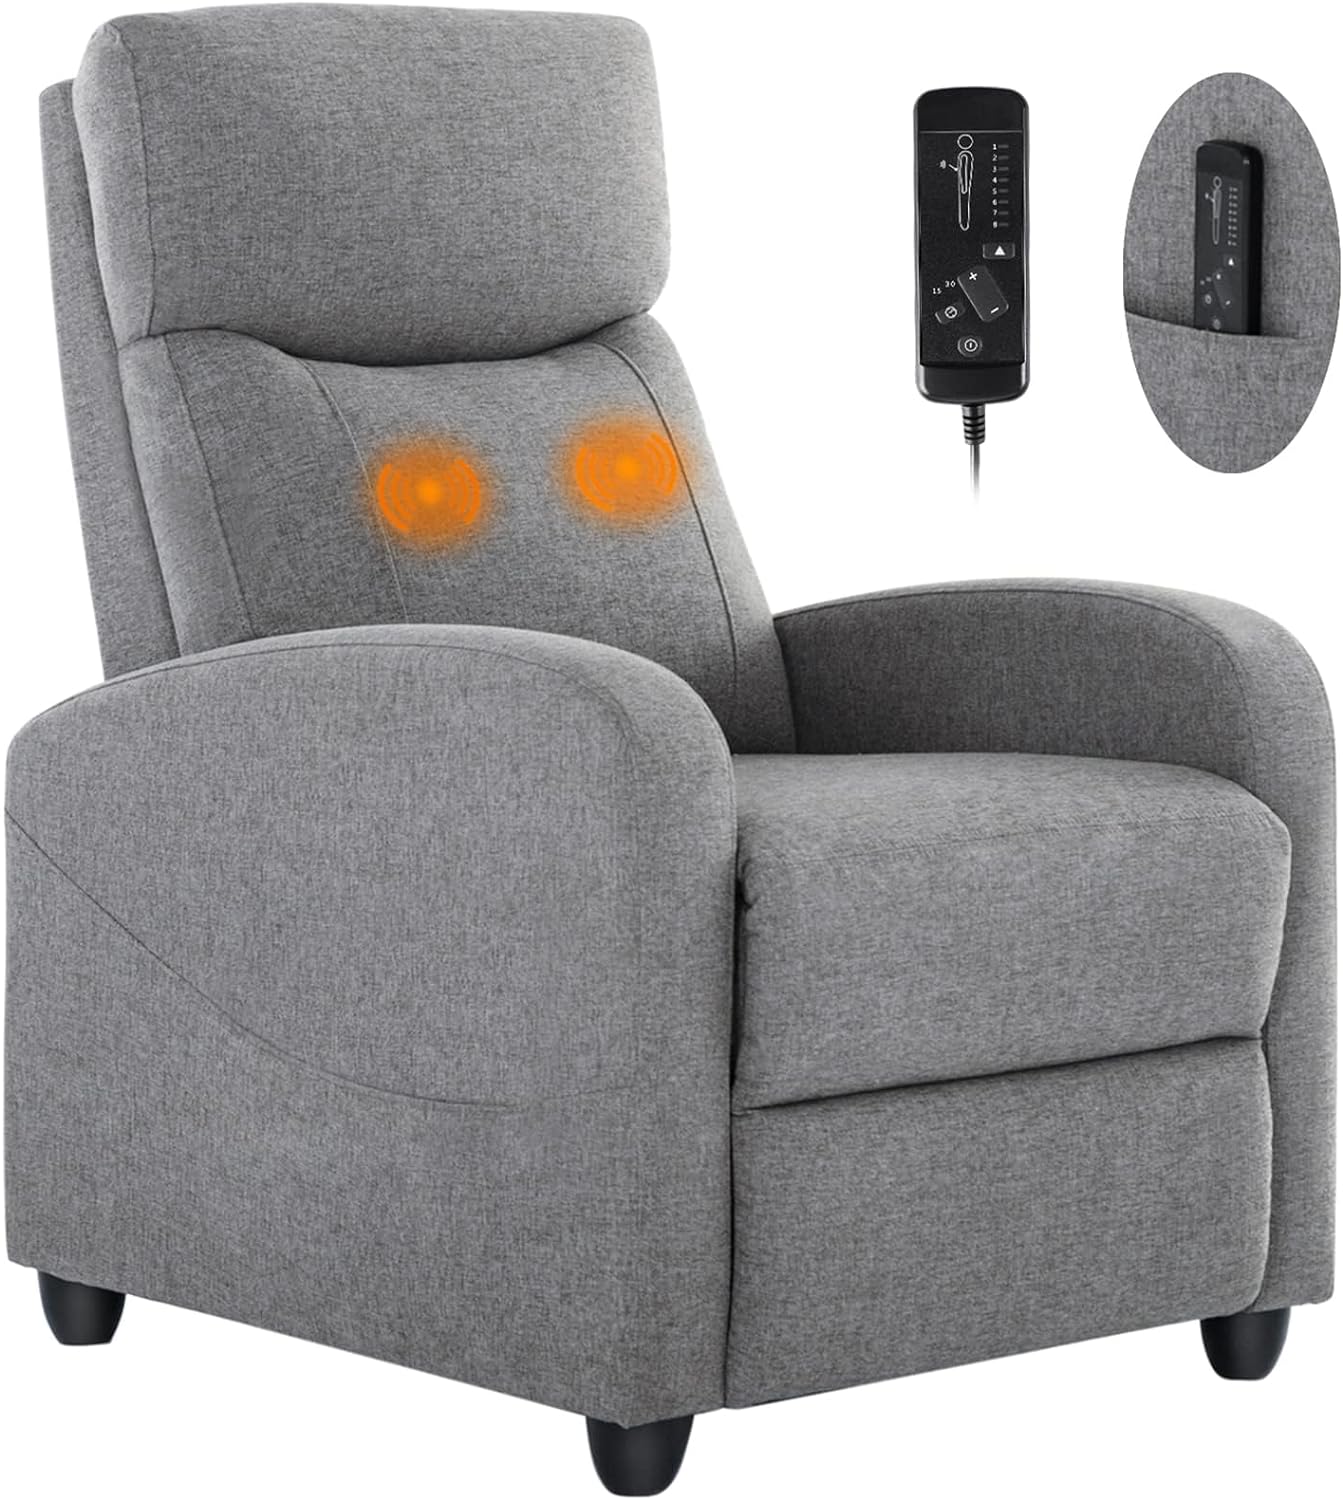 Recliner Chair for Adults, Massage Fabric Small Recliner Sofa Home Theater Seating with Lumbar Support, Adjustable Modern Reclining Chair with Padded Seat Backrest for Living Room (Deep Grey)